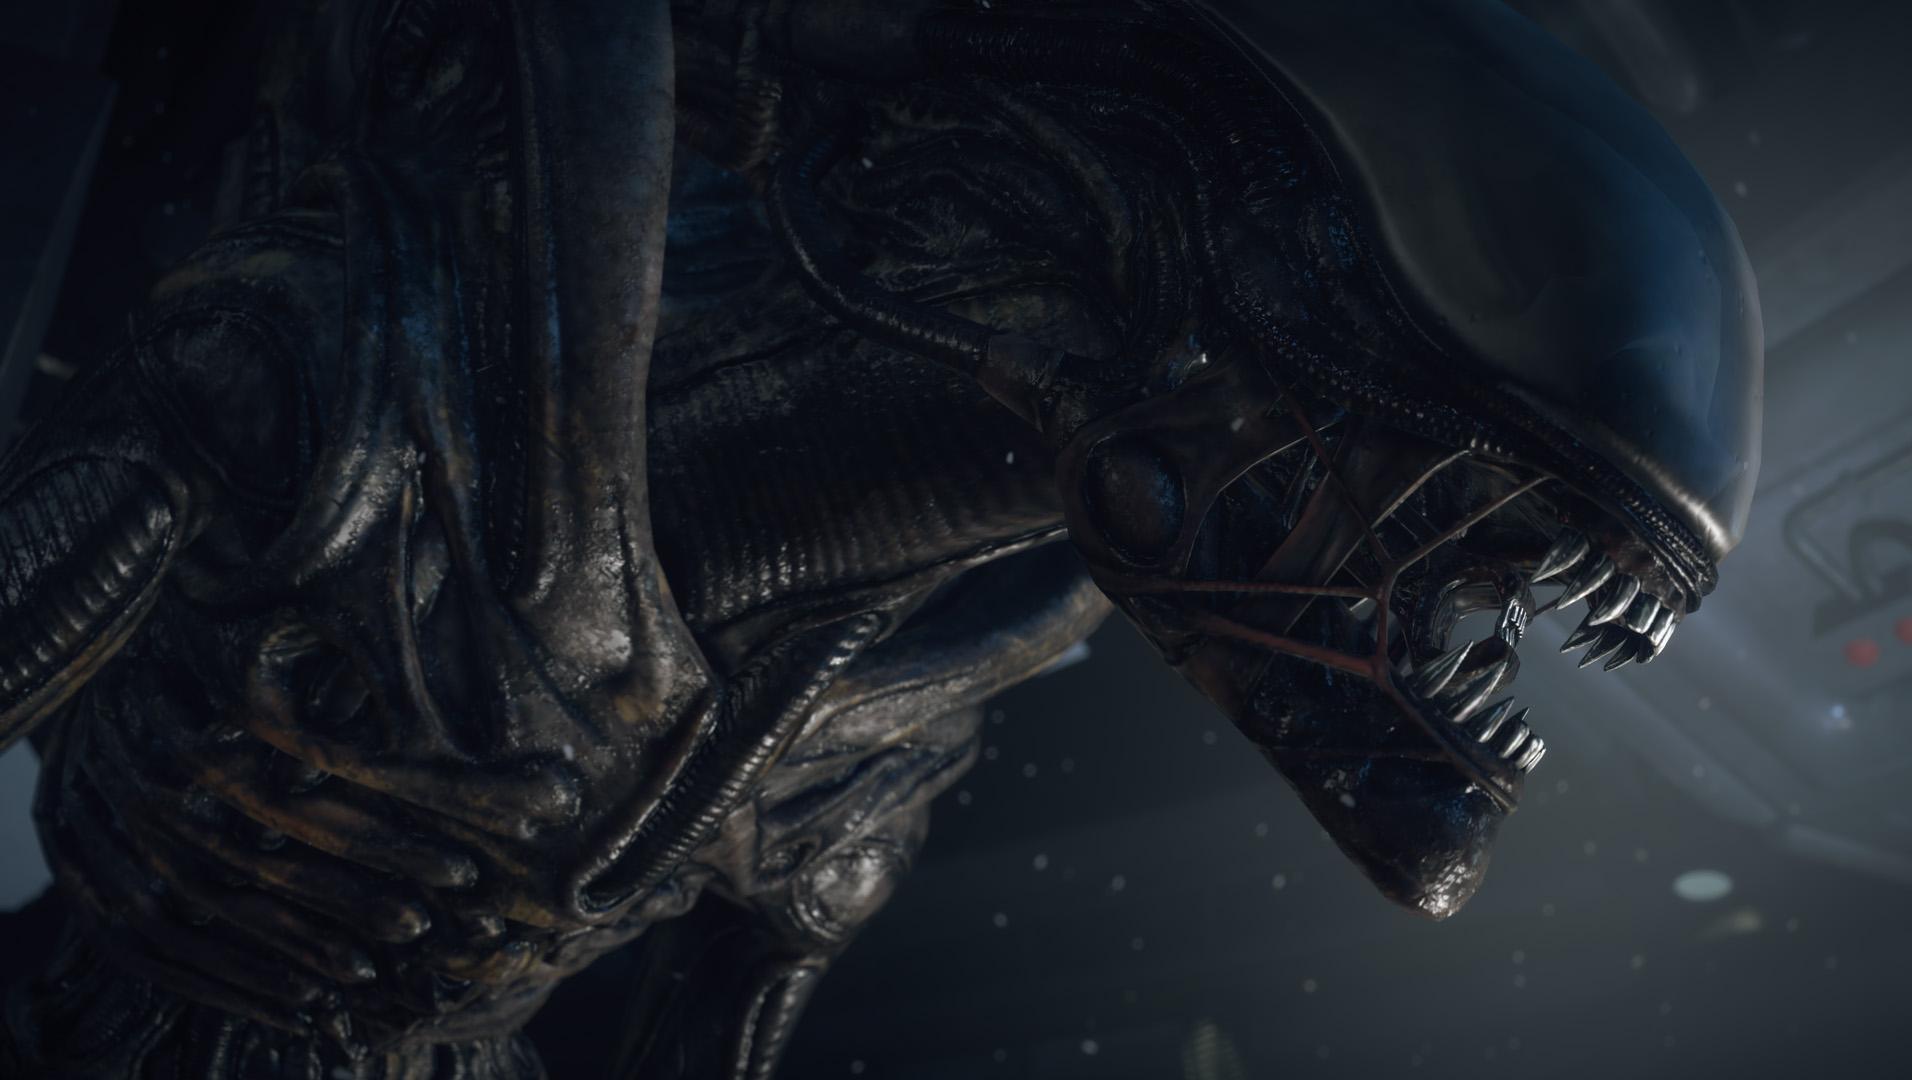 Big News for 'Alien' Fans: Alien Day and New Shots From 'Alien Covenant'